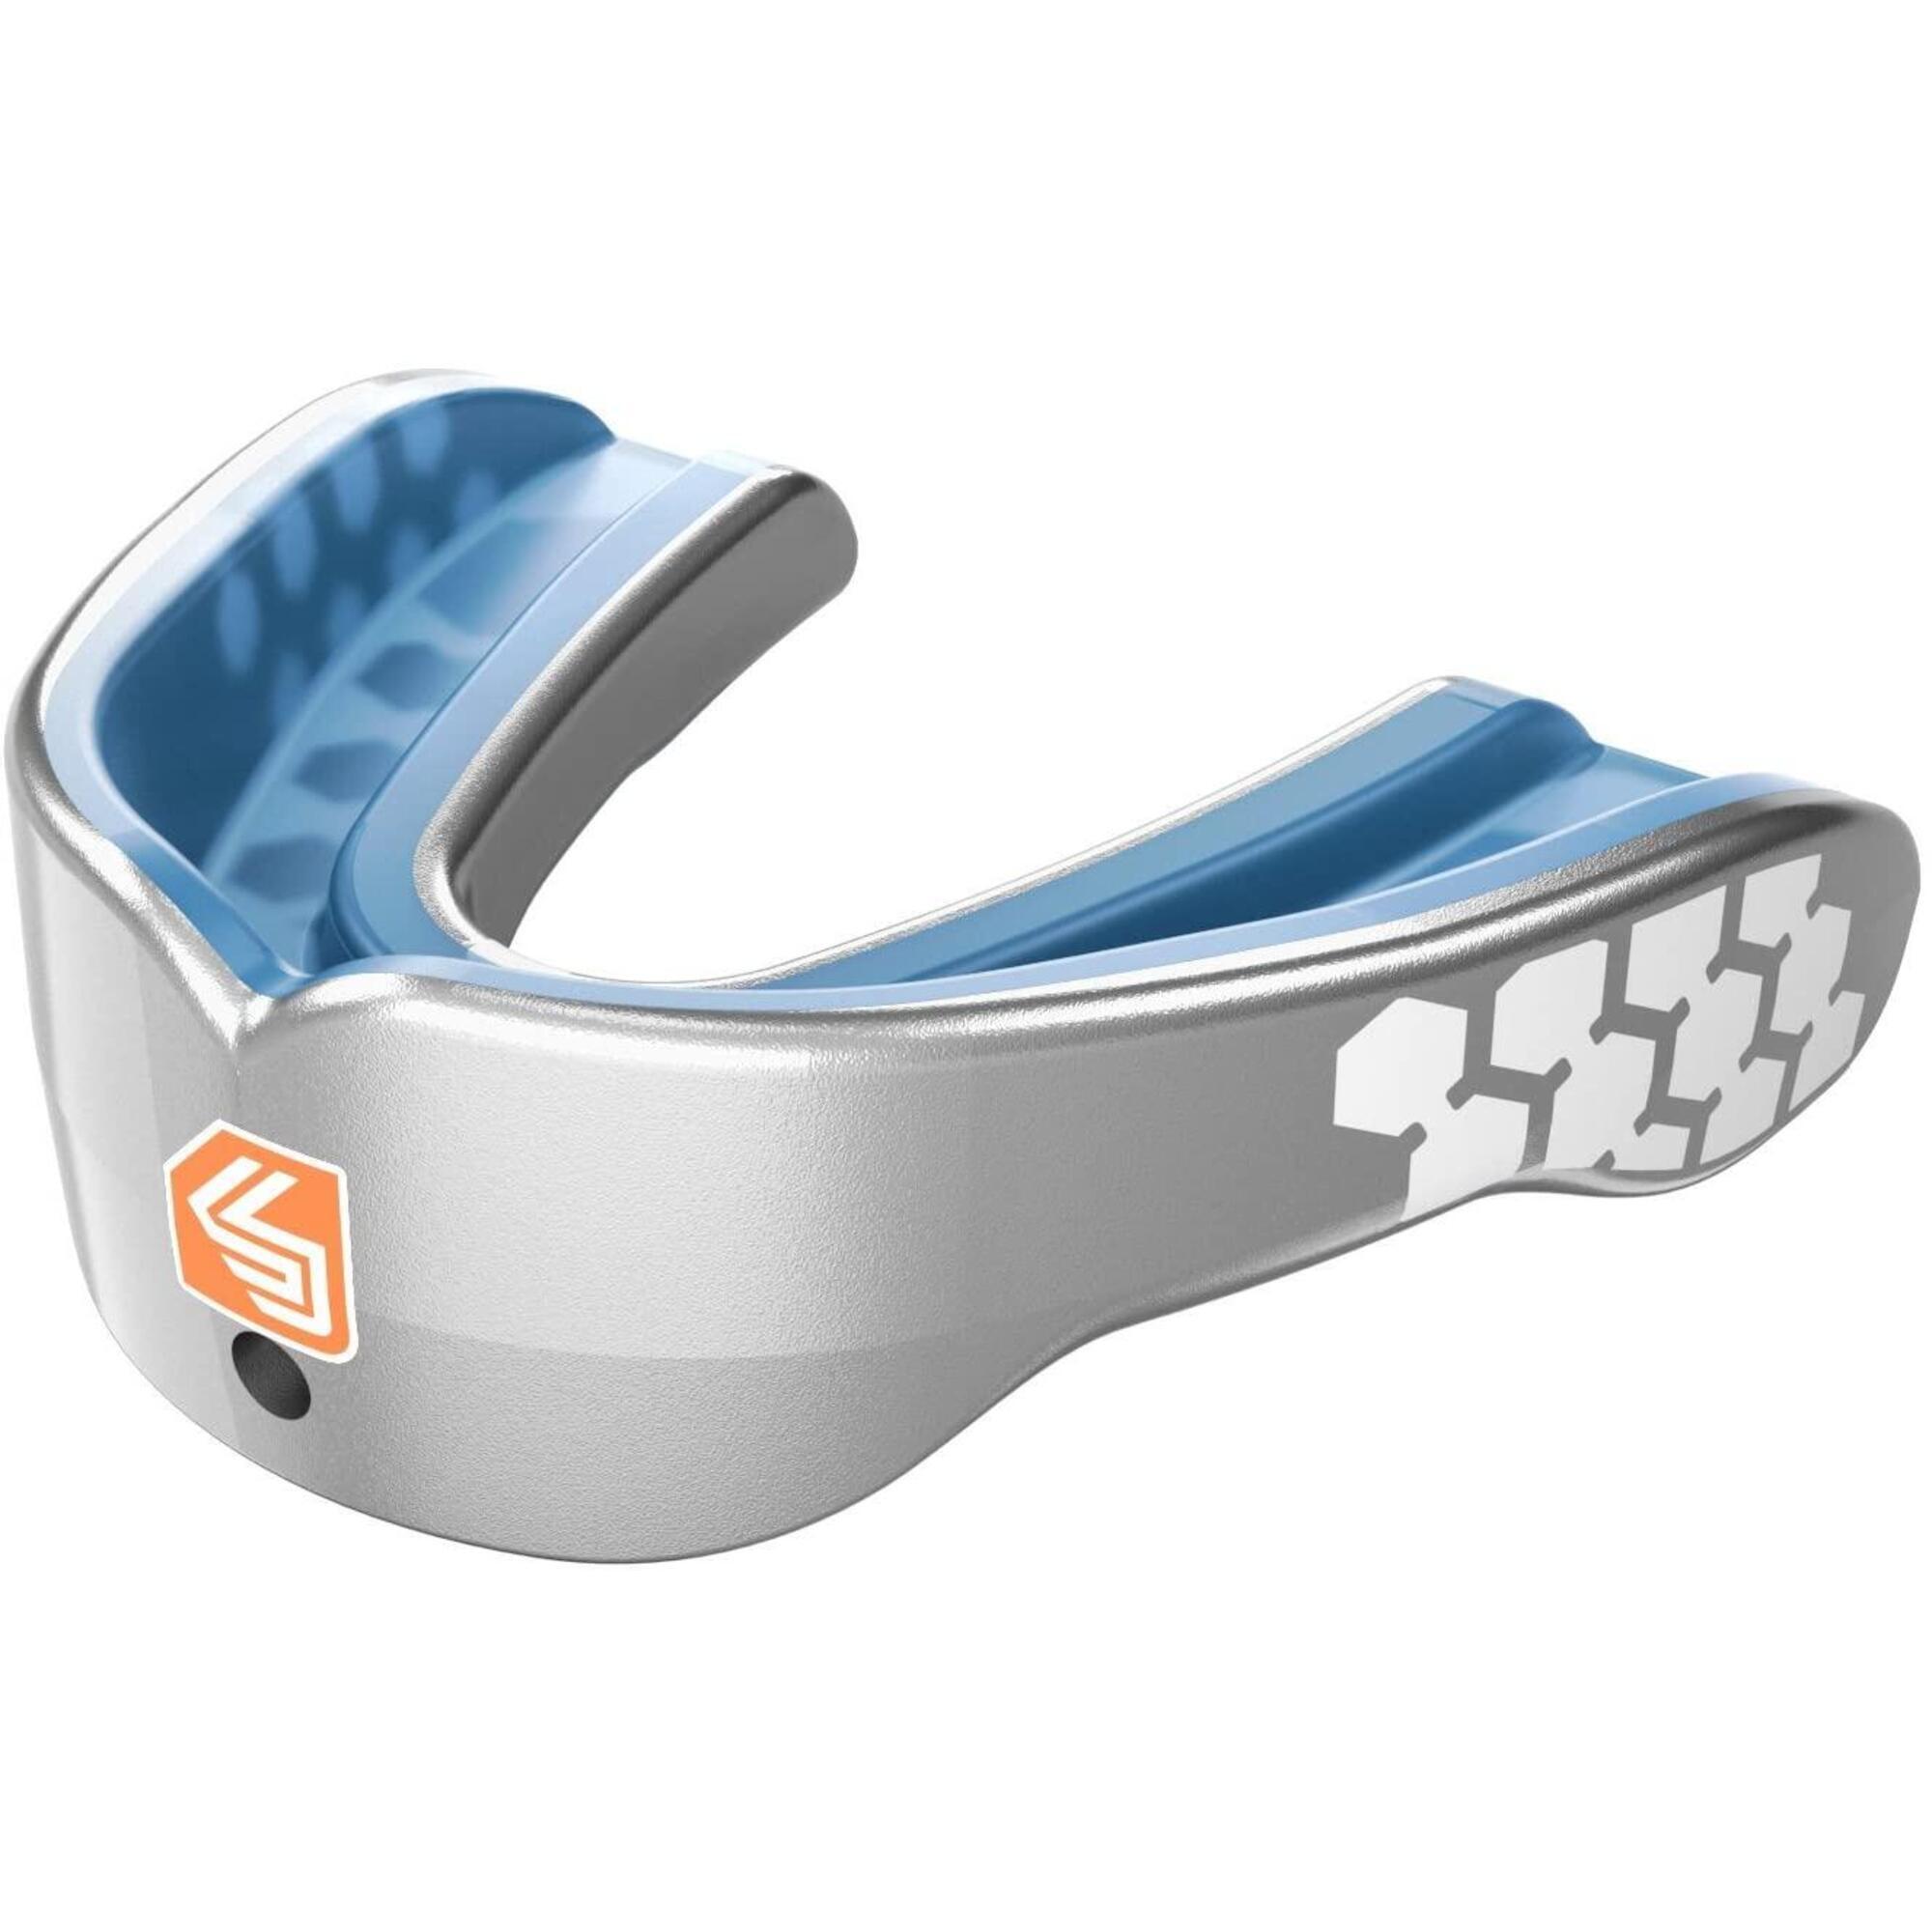 Shockdoctor Gel Max Power Mouth Guard 1/2